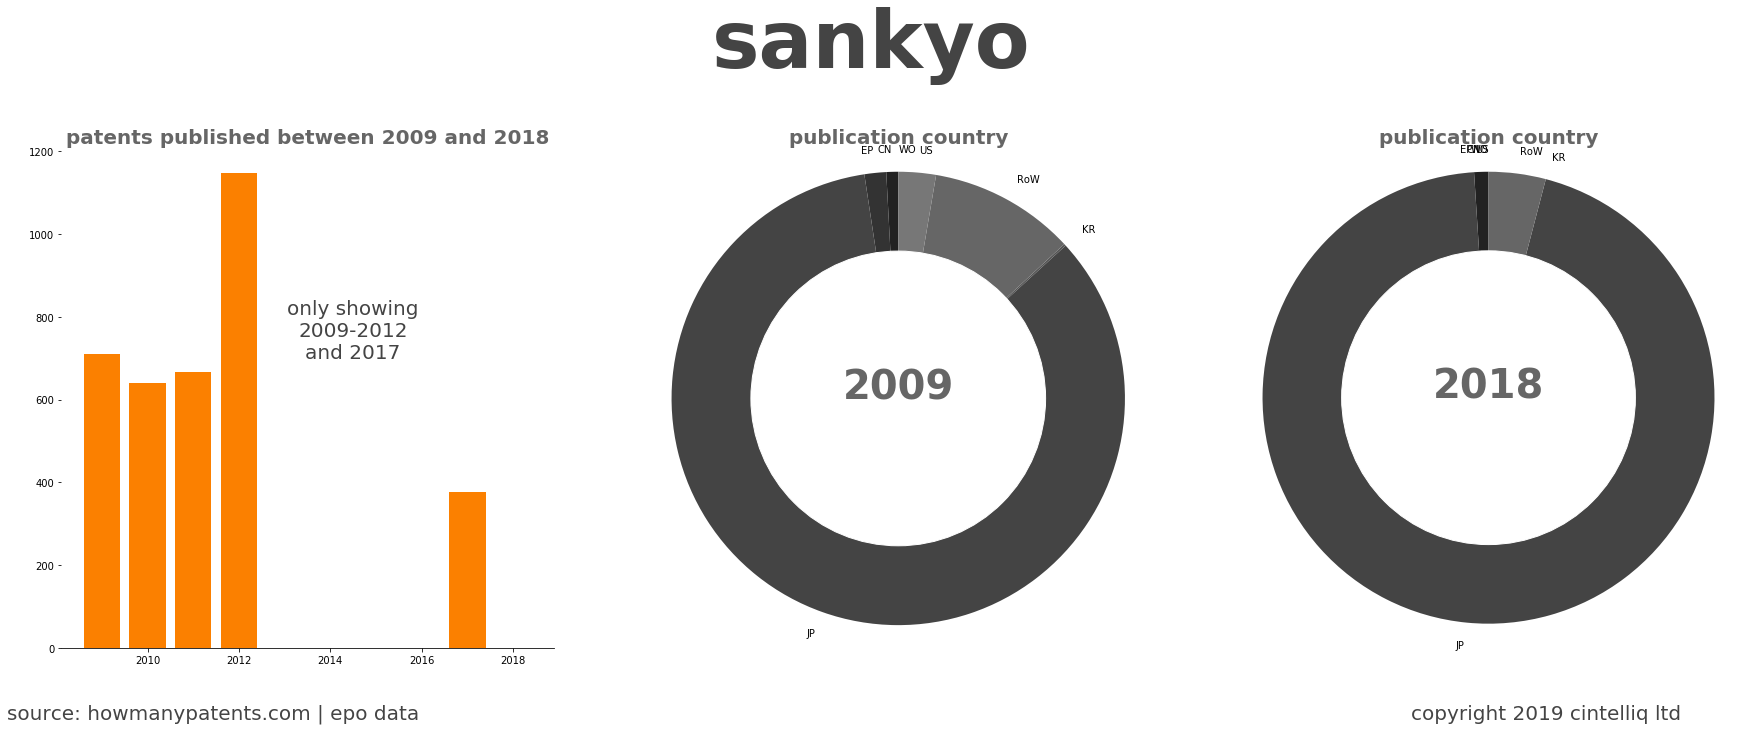 summary of patents for Sankyo